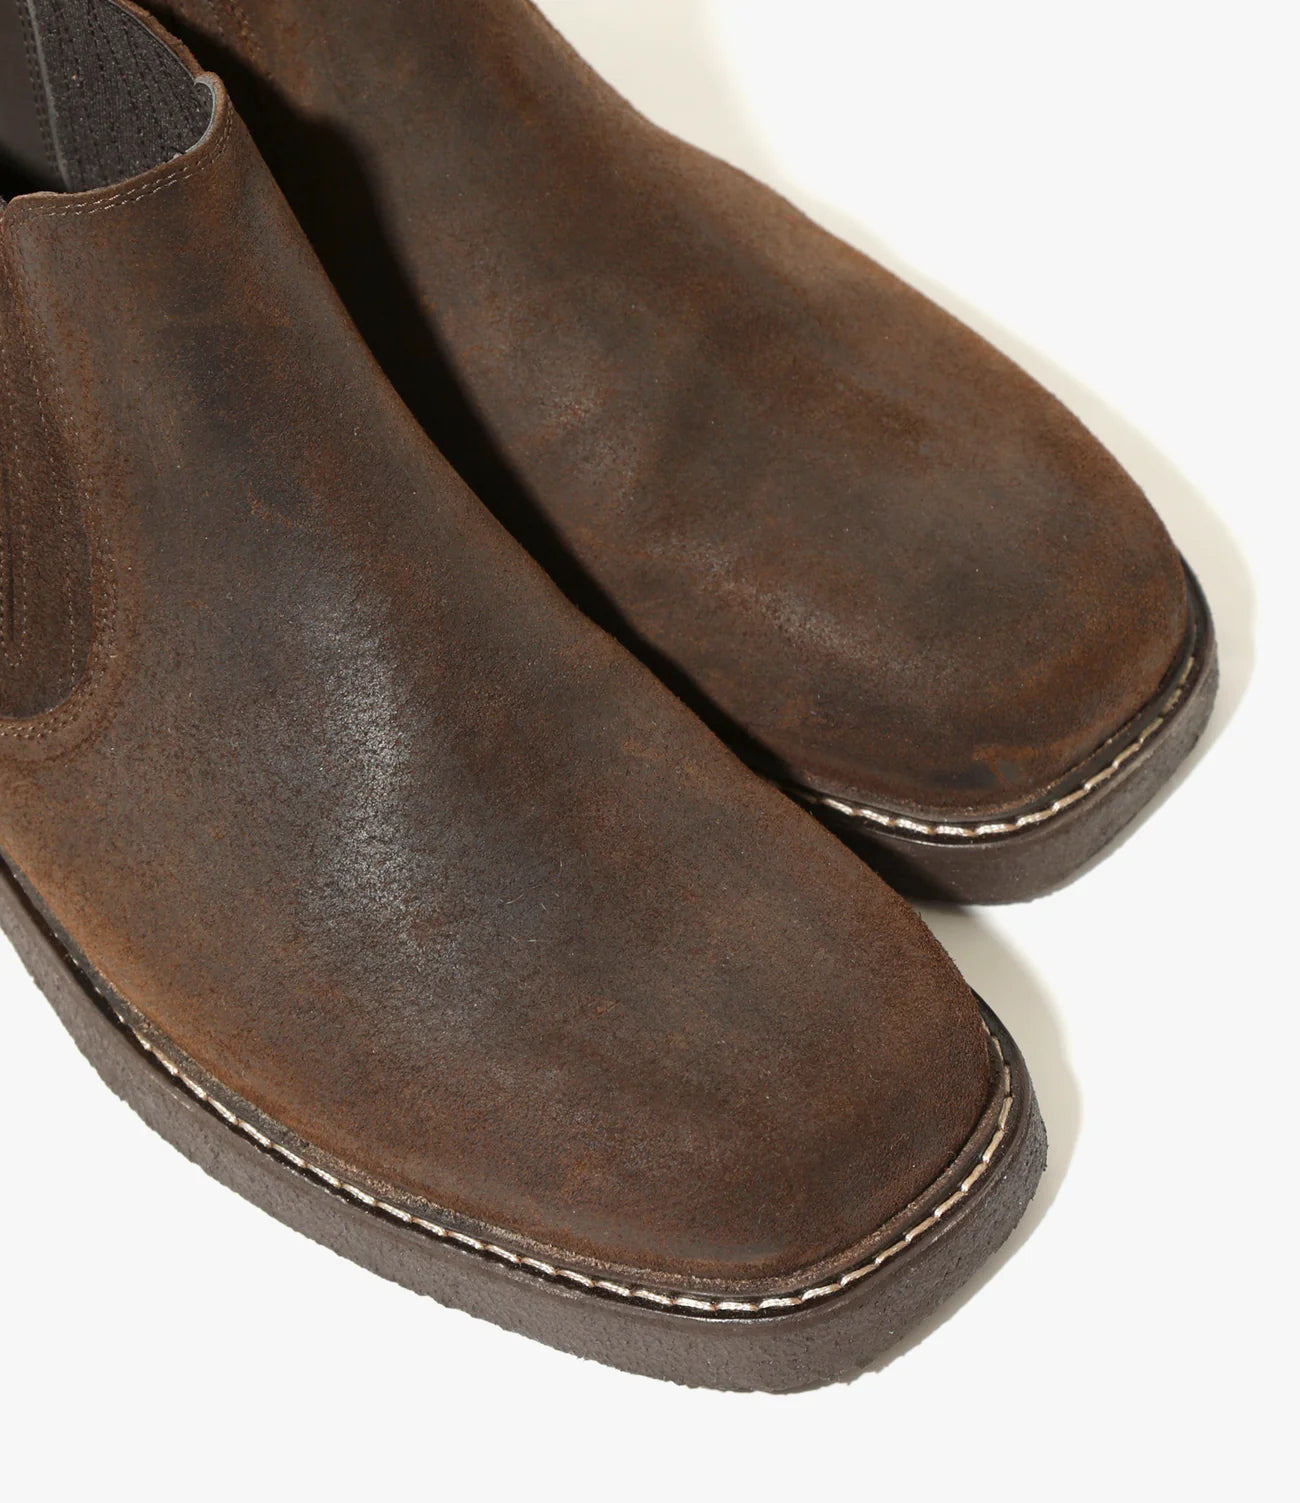 Needles Norwegian Welt Chelsea Boot - Brown Rough Out